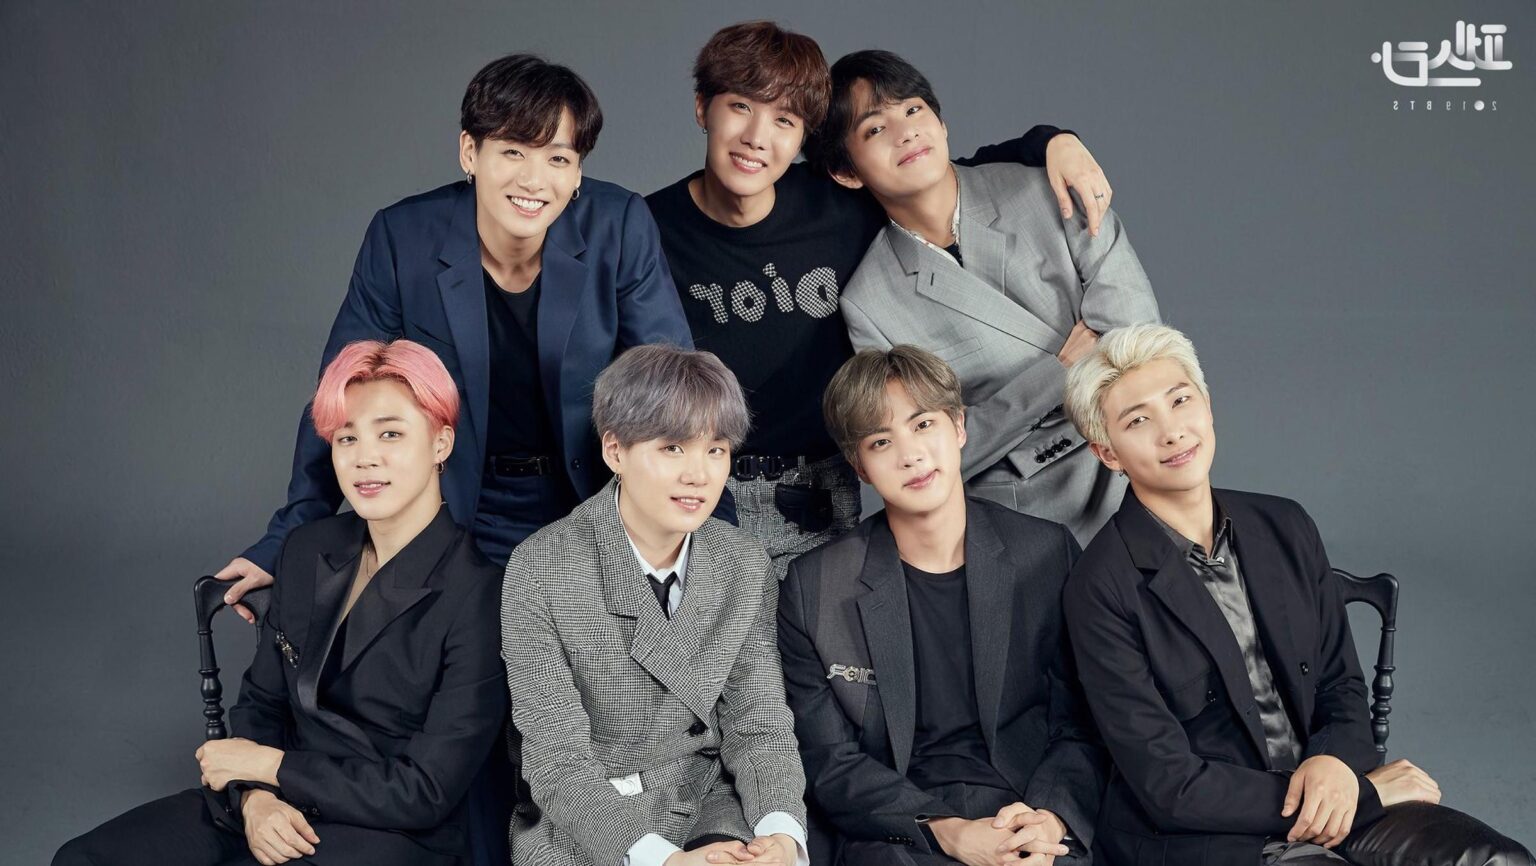 BTS fans or social justice warriors? Find out more about how the ARMY uses social media for good causes.